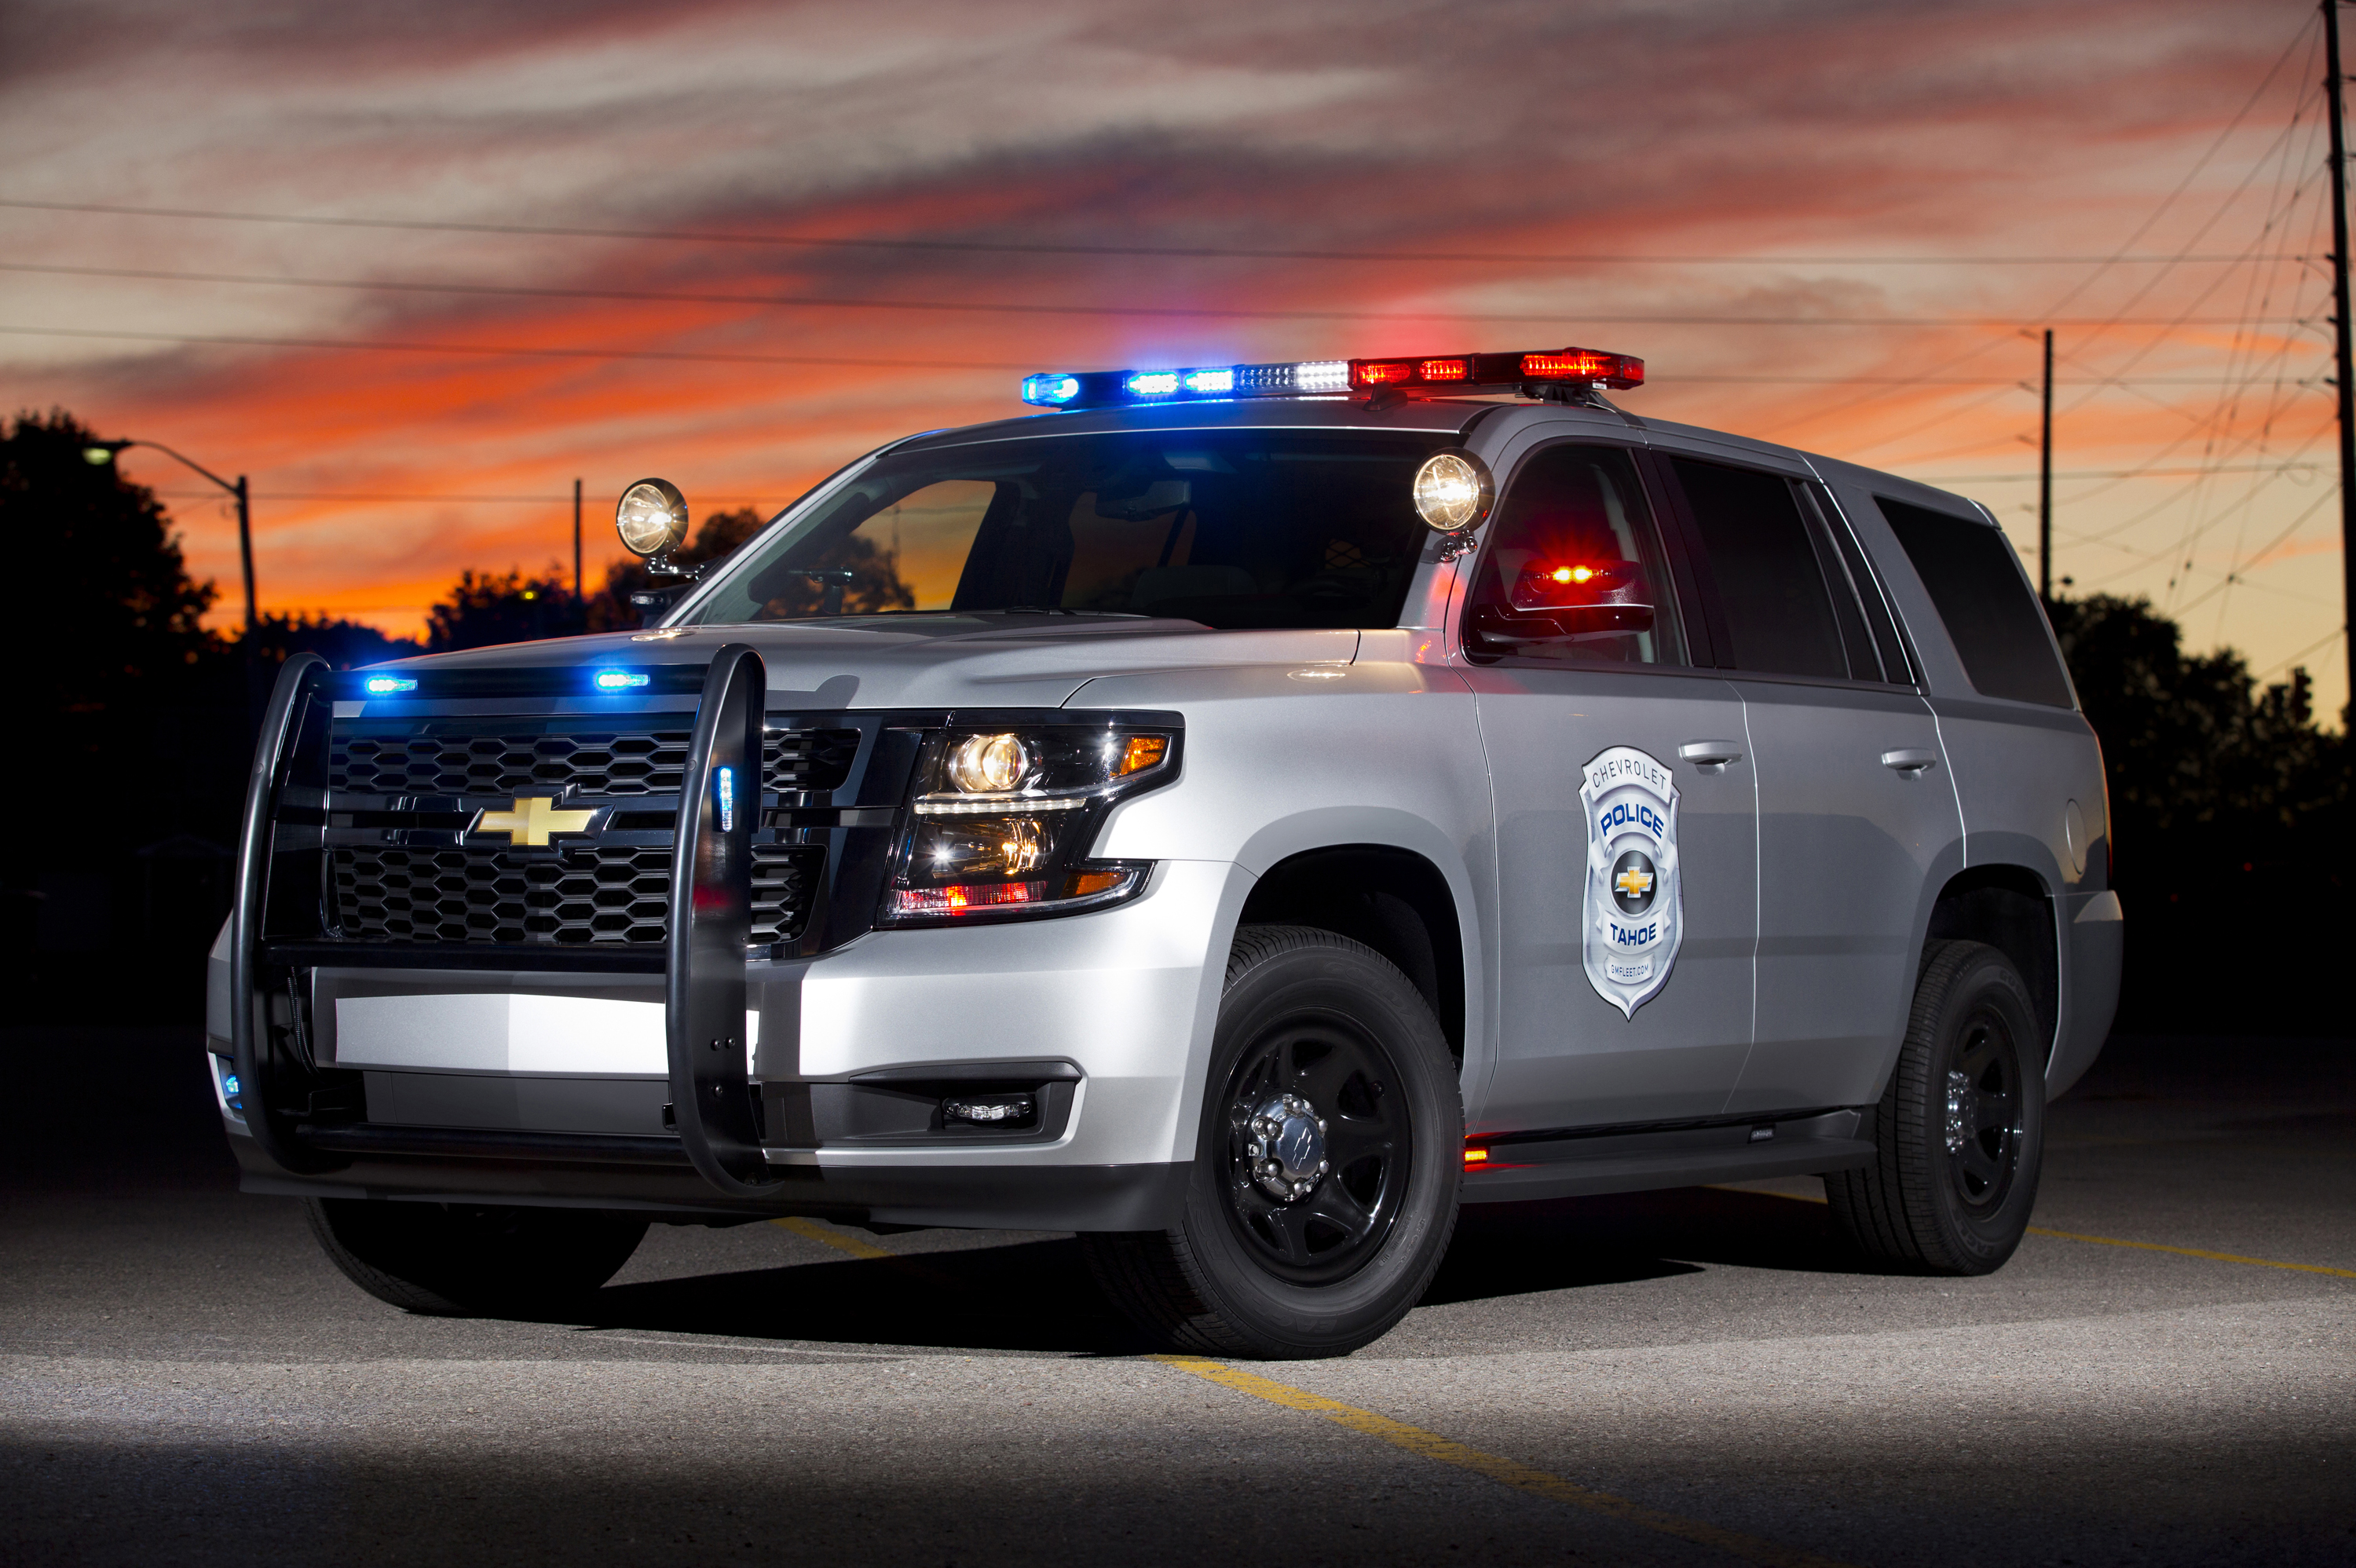 Chevy Tahoe 2020 Police